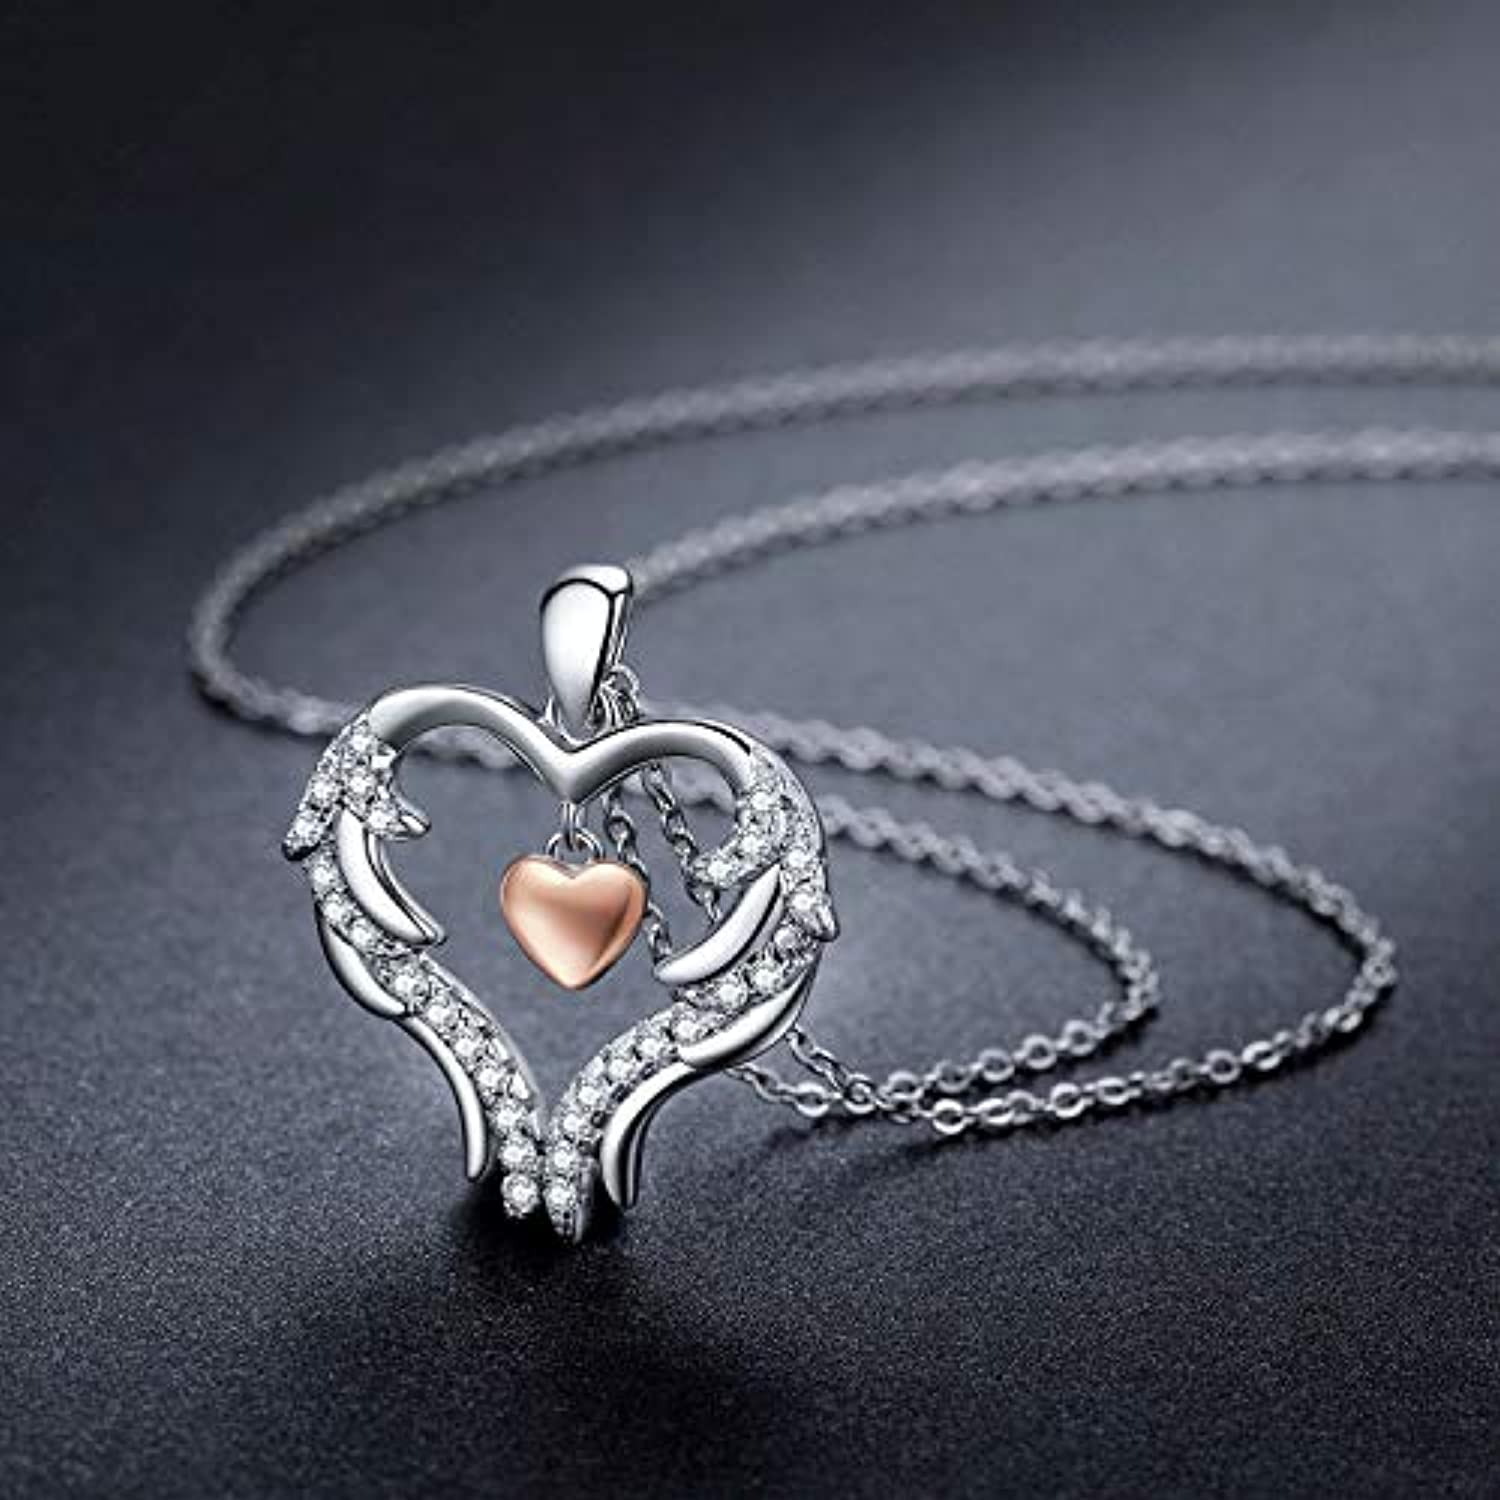 Angel Wings Necklace Heart Necklace S925 Sterling Silver Love Heart Pendant Romantic Jewelry Gifts with Gift Box for Women Girls Anniversary Wedding